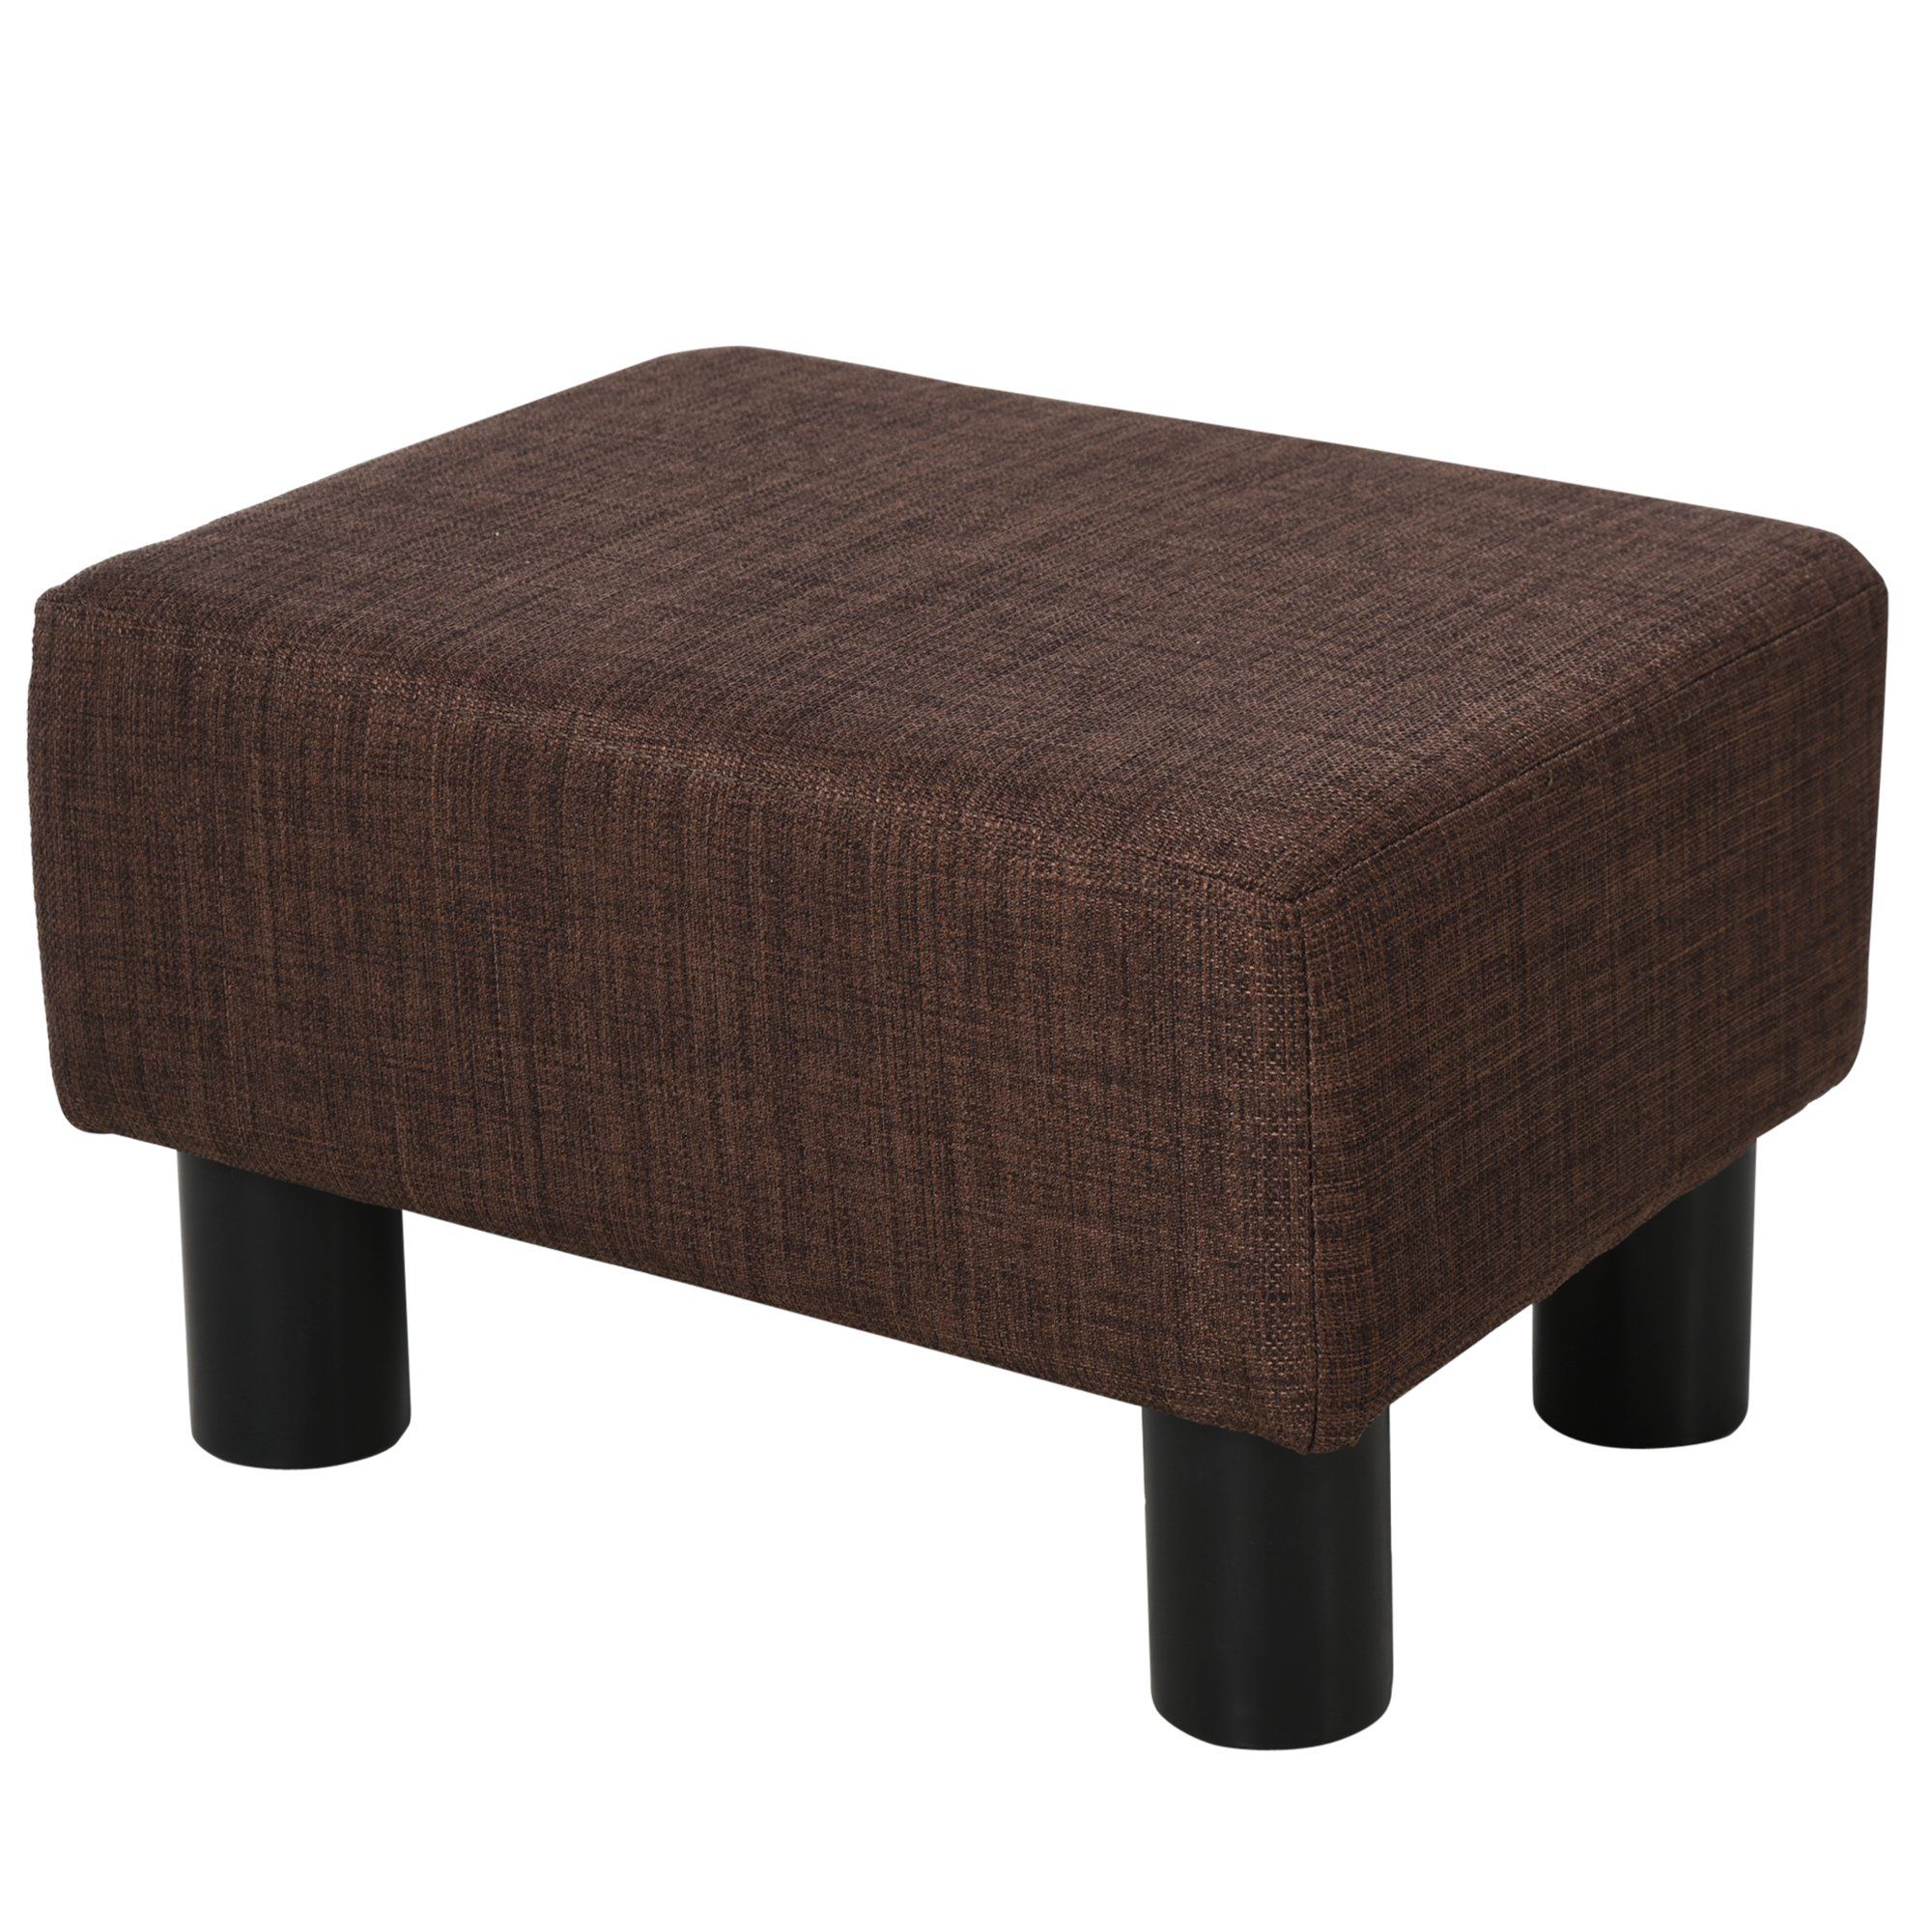 Homcom Linen Fabric Footstool Ottoman Cube W/ 4 Plastic Legs Black Intended For Solid Cuboid Pouf Ottomans (View 2 of 20)